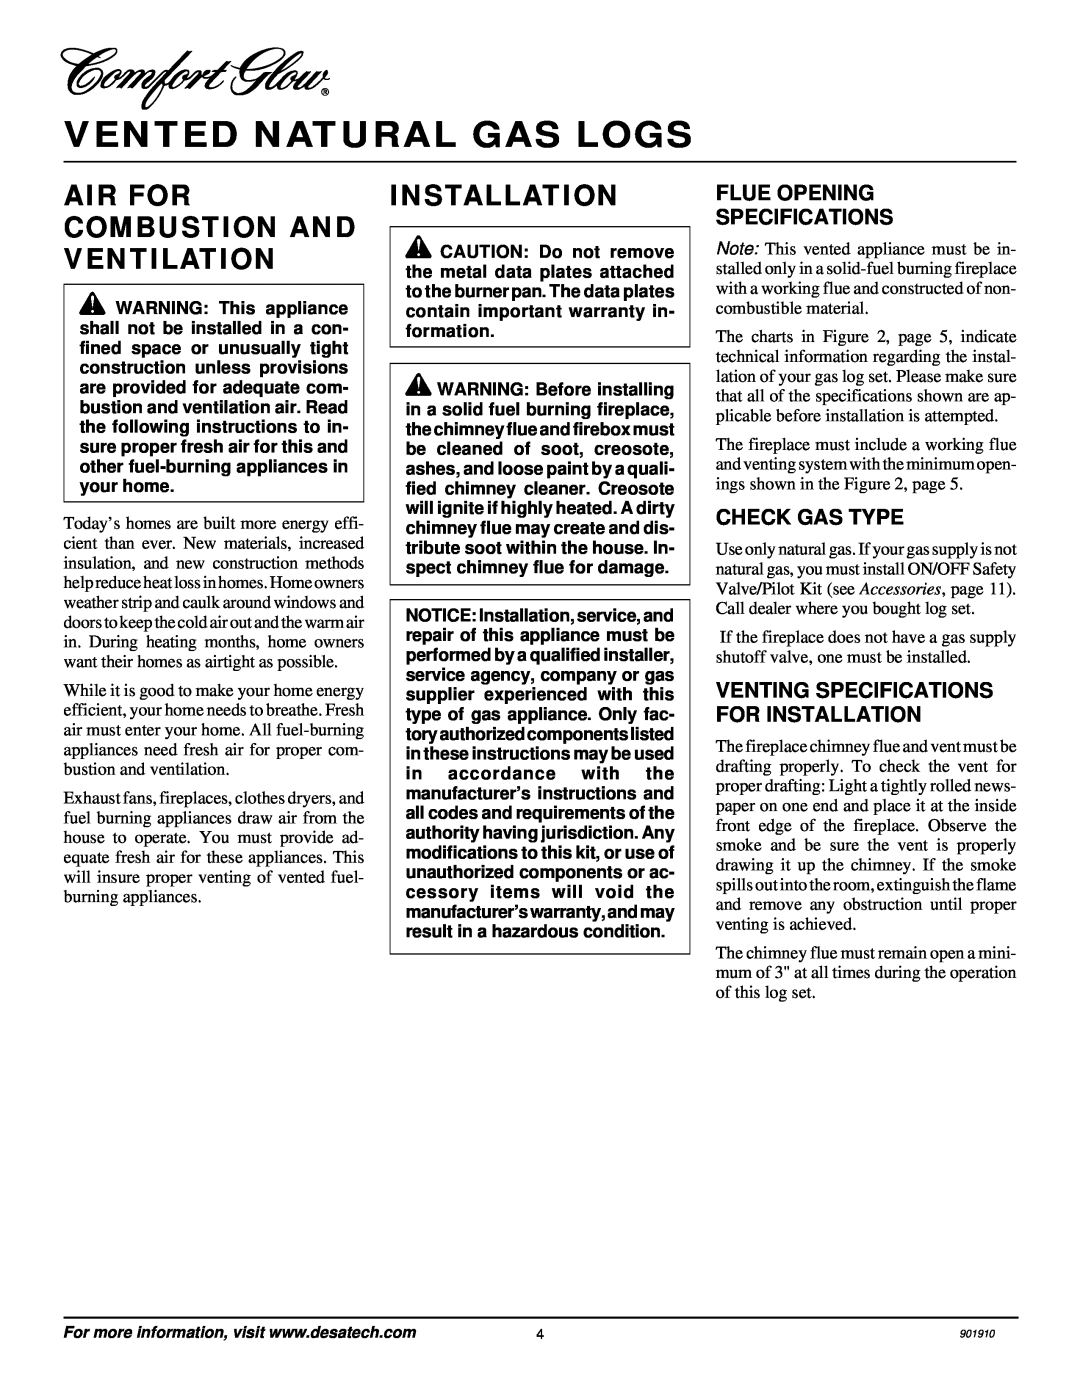 Desa 901910-01A.pdf Air For Combustion And Ventilation, Installation, Vented Natural Gas Logs, Flue Opening Specifications 